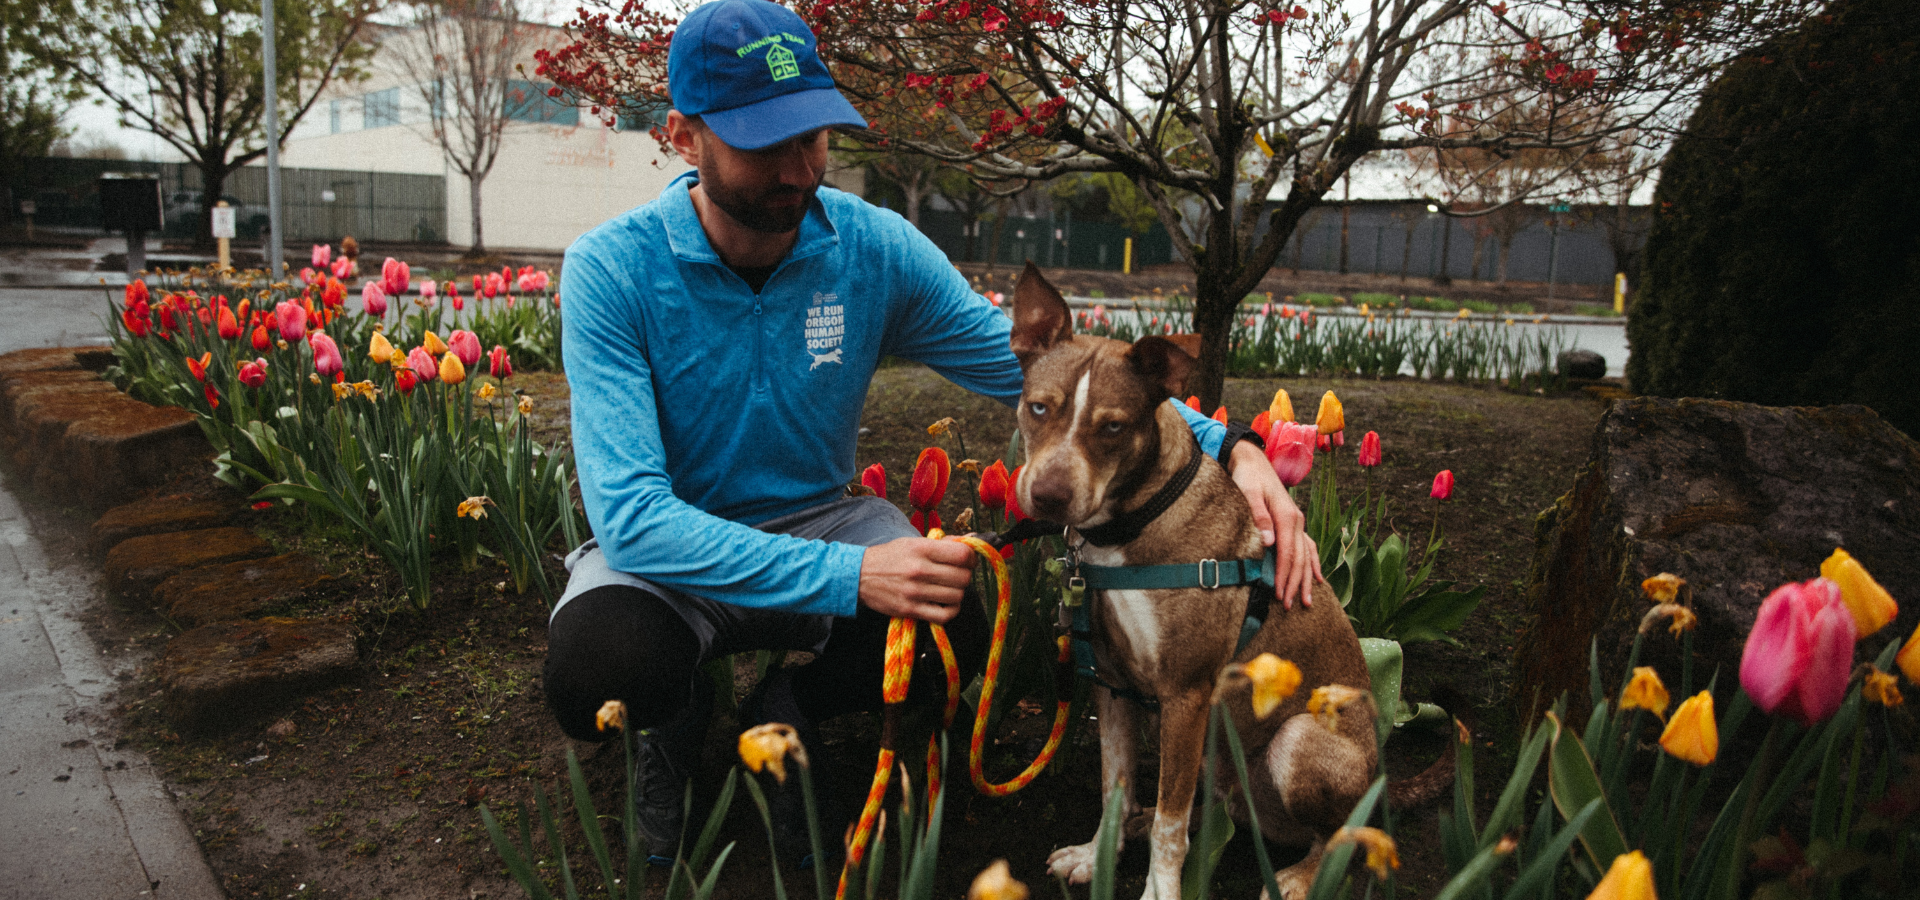 OHS running team volunteer with godric the dog in the OHS portland campu rose garden